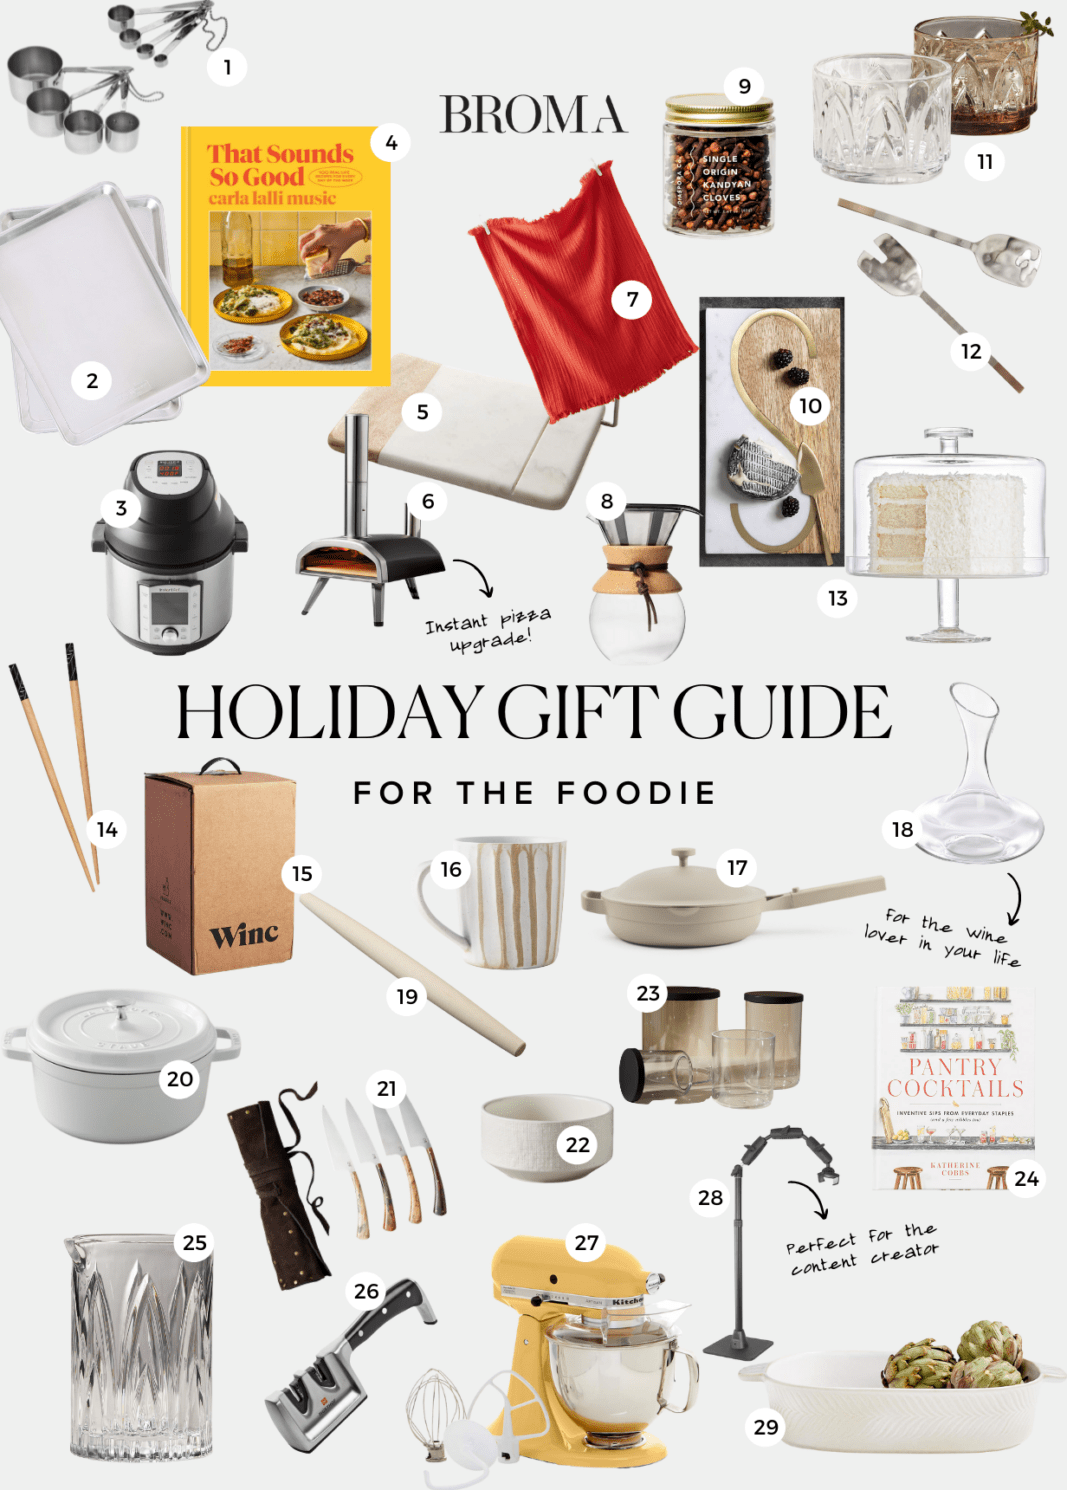 2021 Kitchen Gift Guide - The Best Kitchen Gifts for 2021